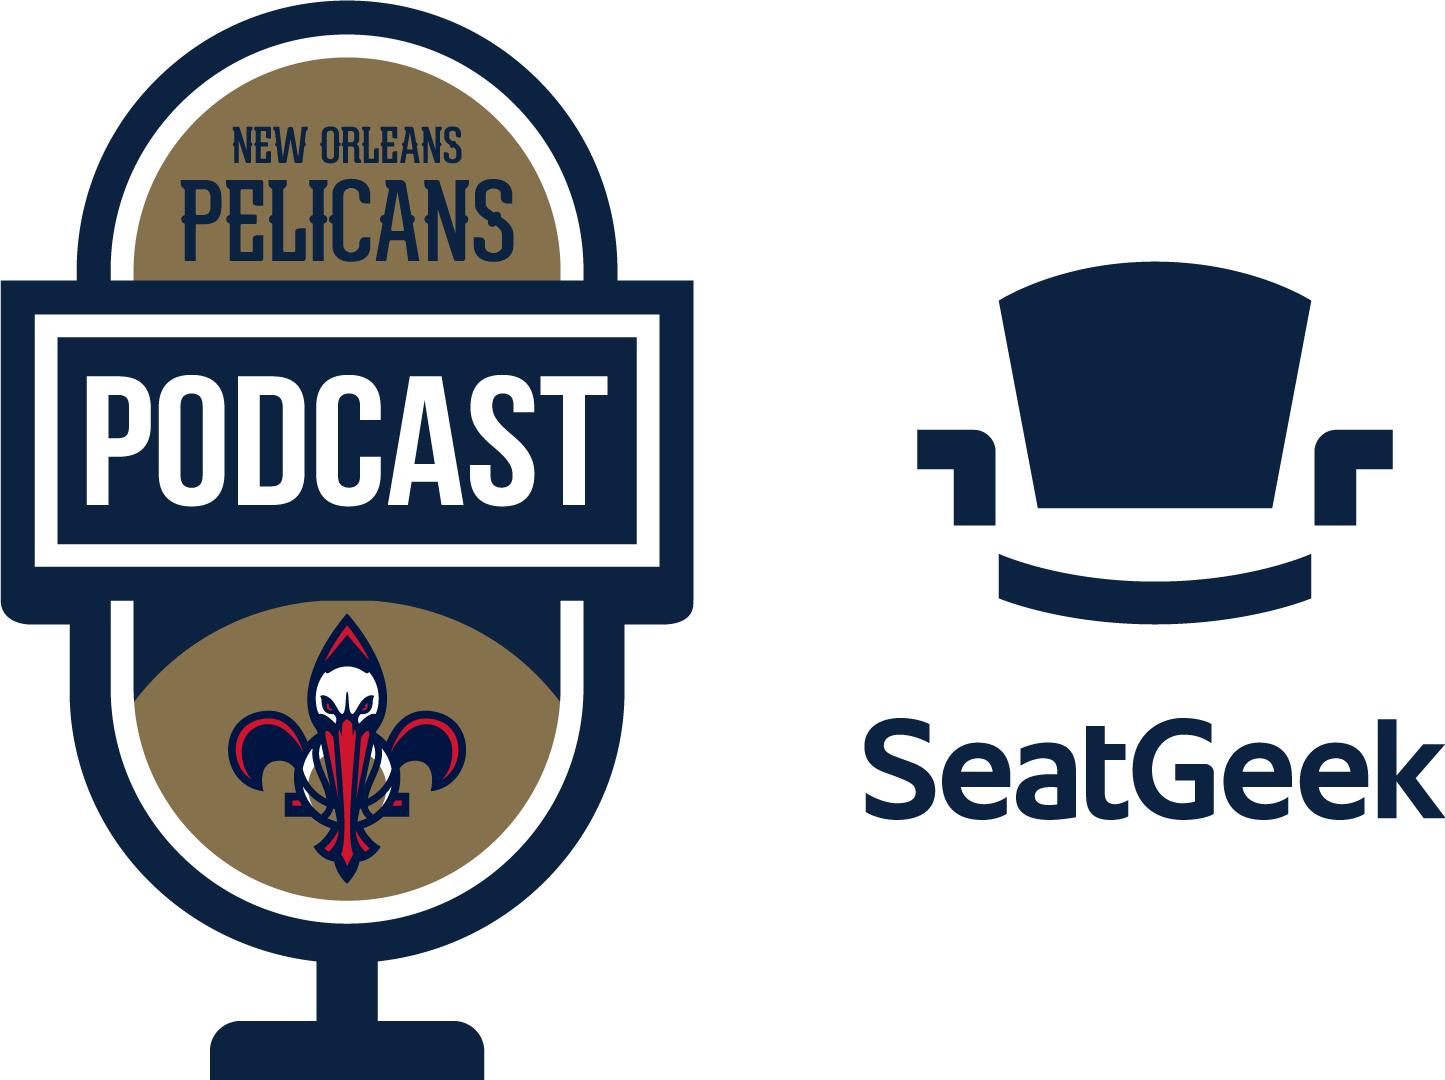 NBA Draft Lottery Preview on the New Orleans Pelicans podcast presented by SeatGeek - June 22, 2021